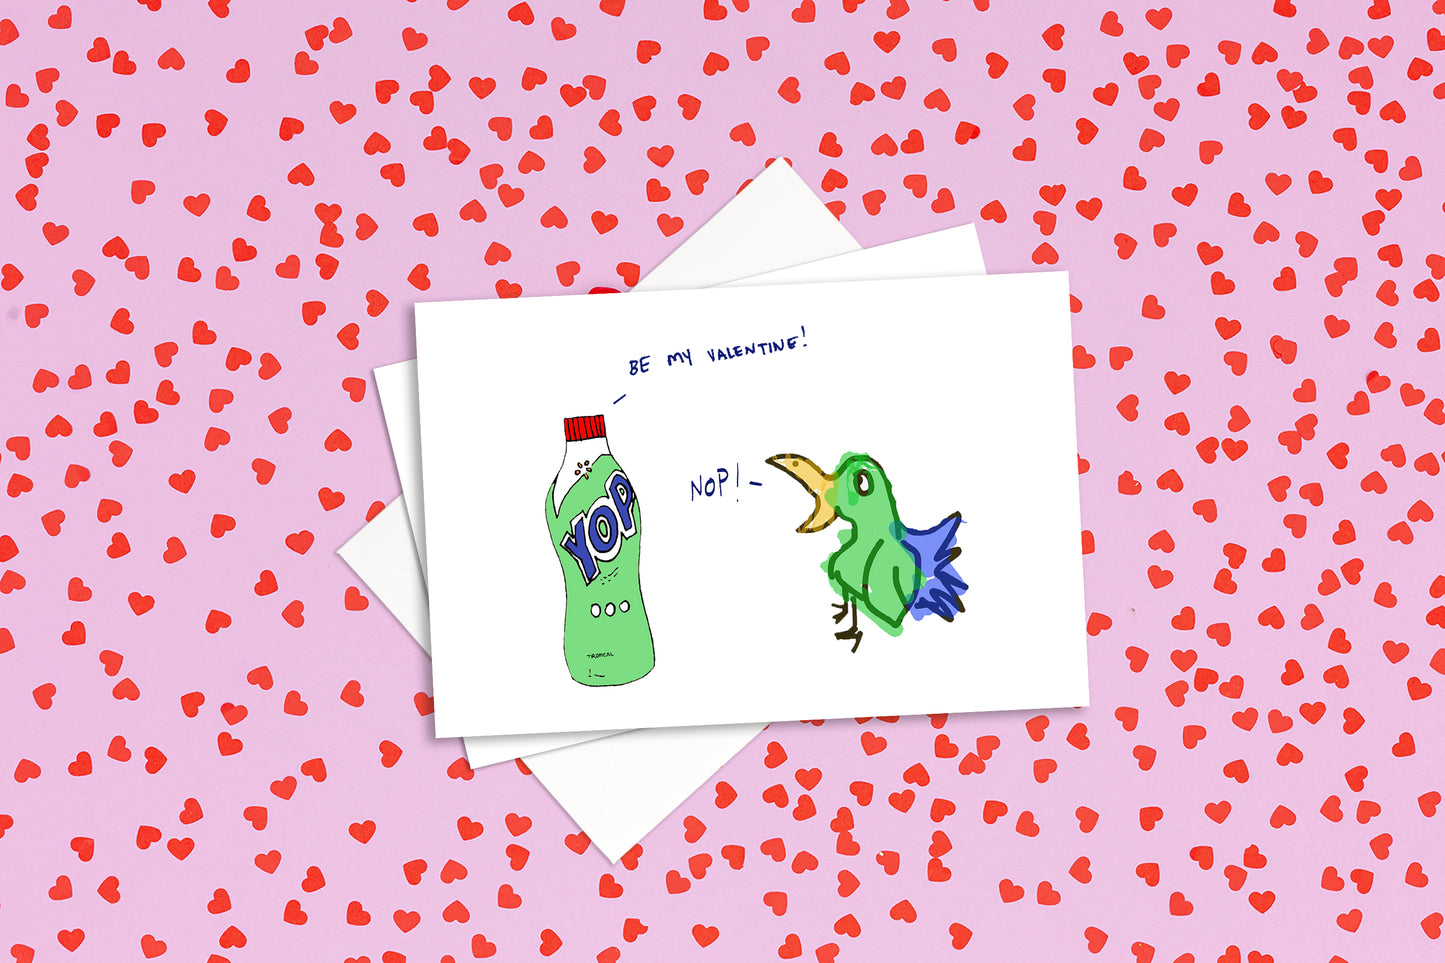 yop and nop valentine's day card